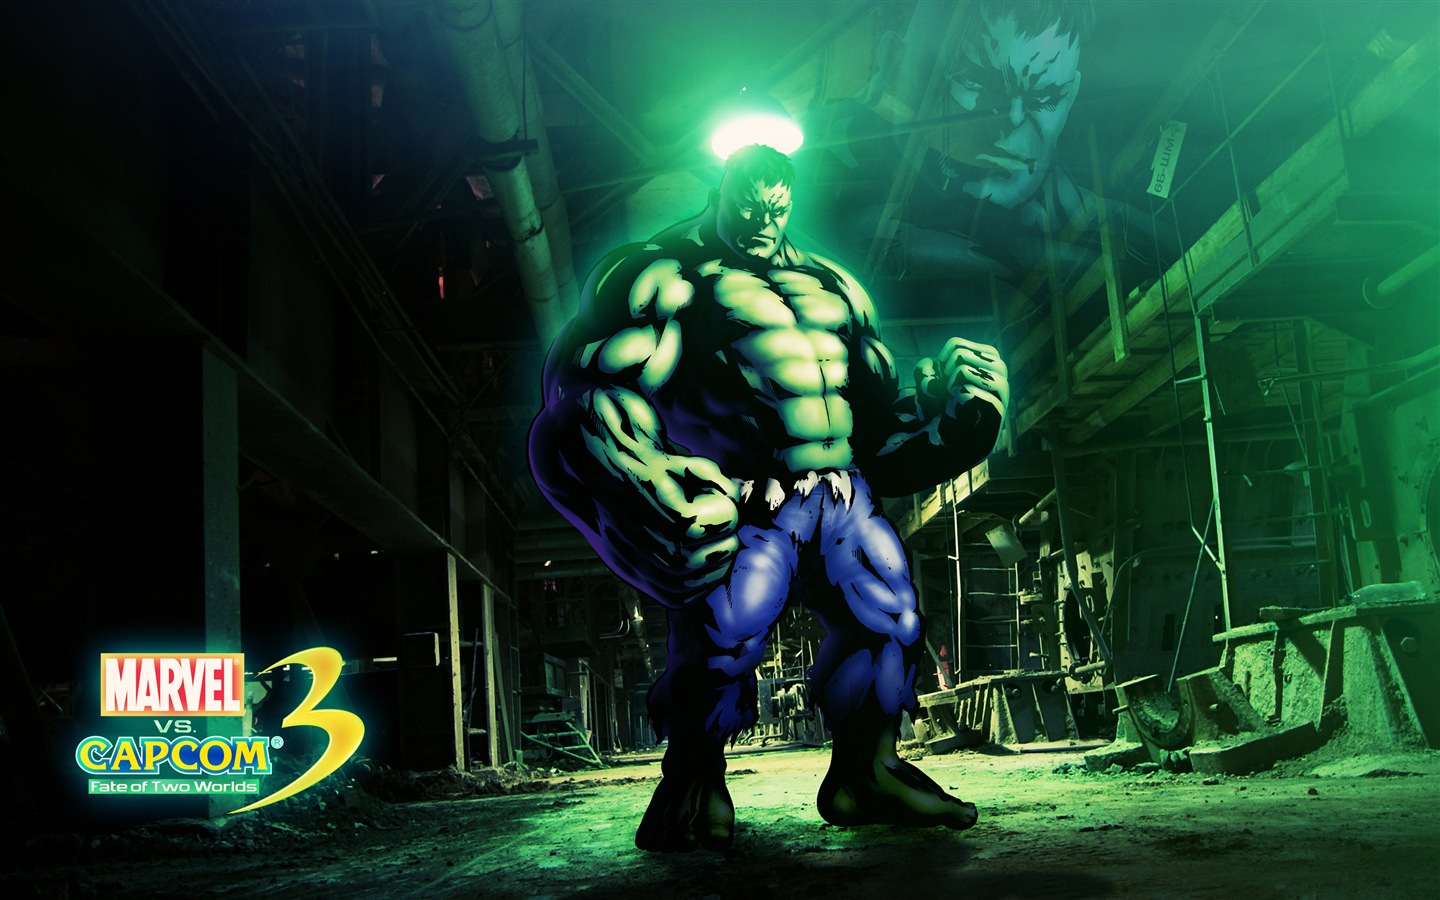 Marvel VS. Capcom 3: Fate of Two Worlds wallpapers HD herní #11 - 1440x900